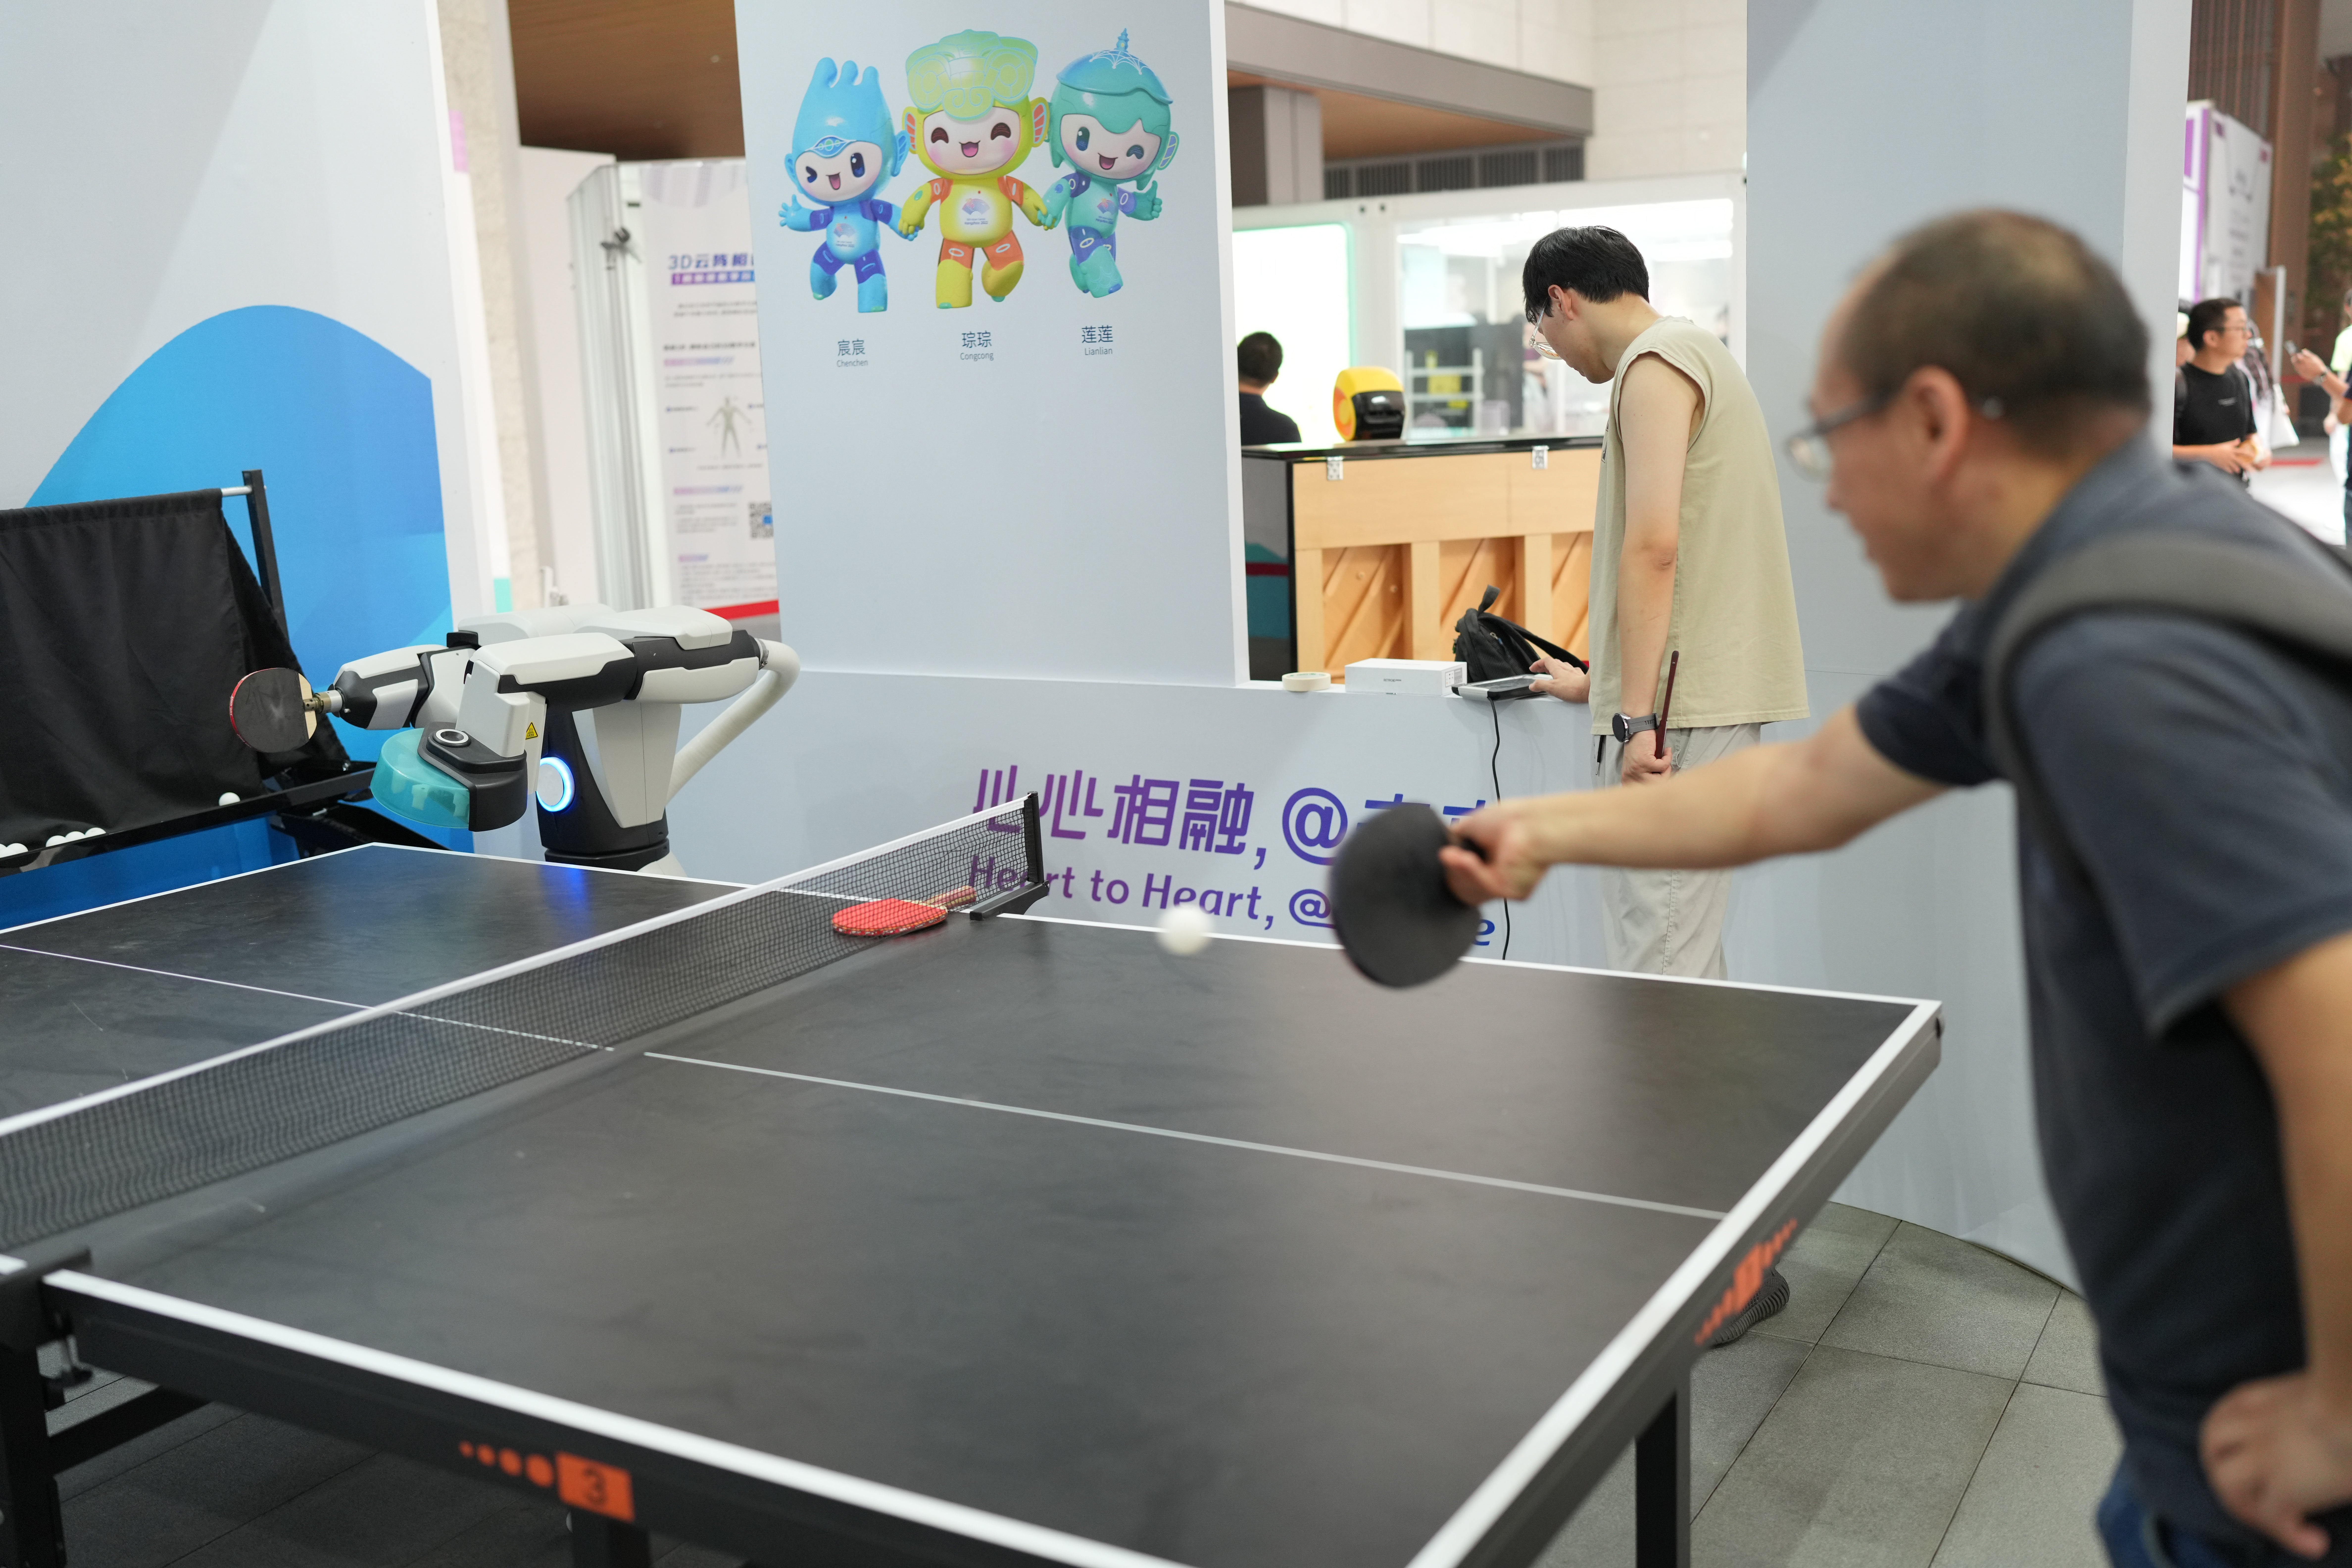 Playing table tennis with a robot is demonstrated in the Asian Games Village